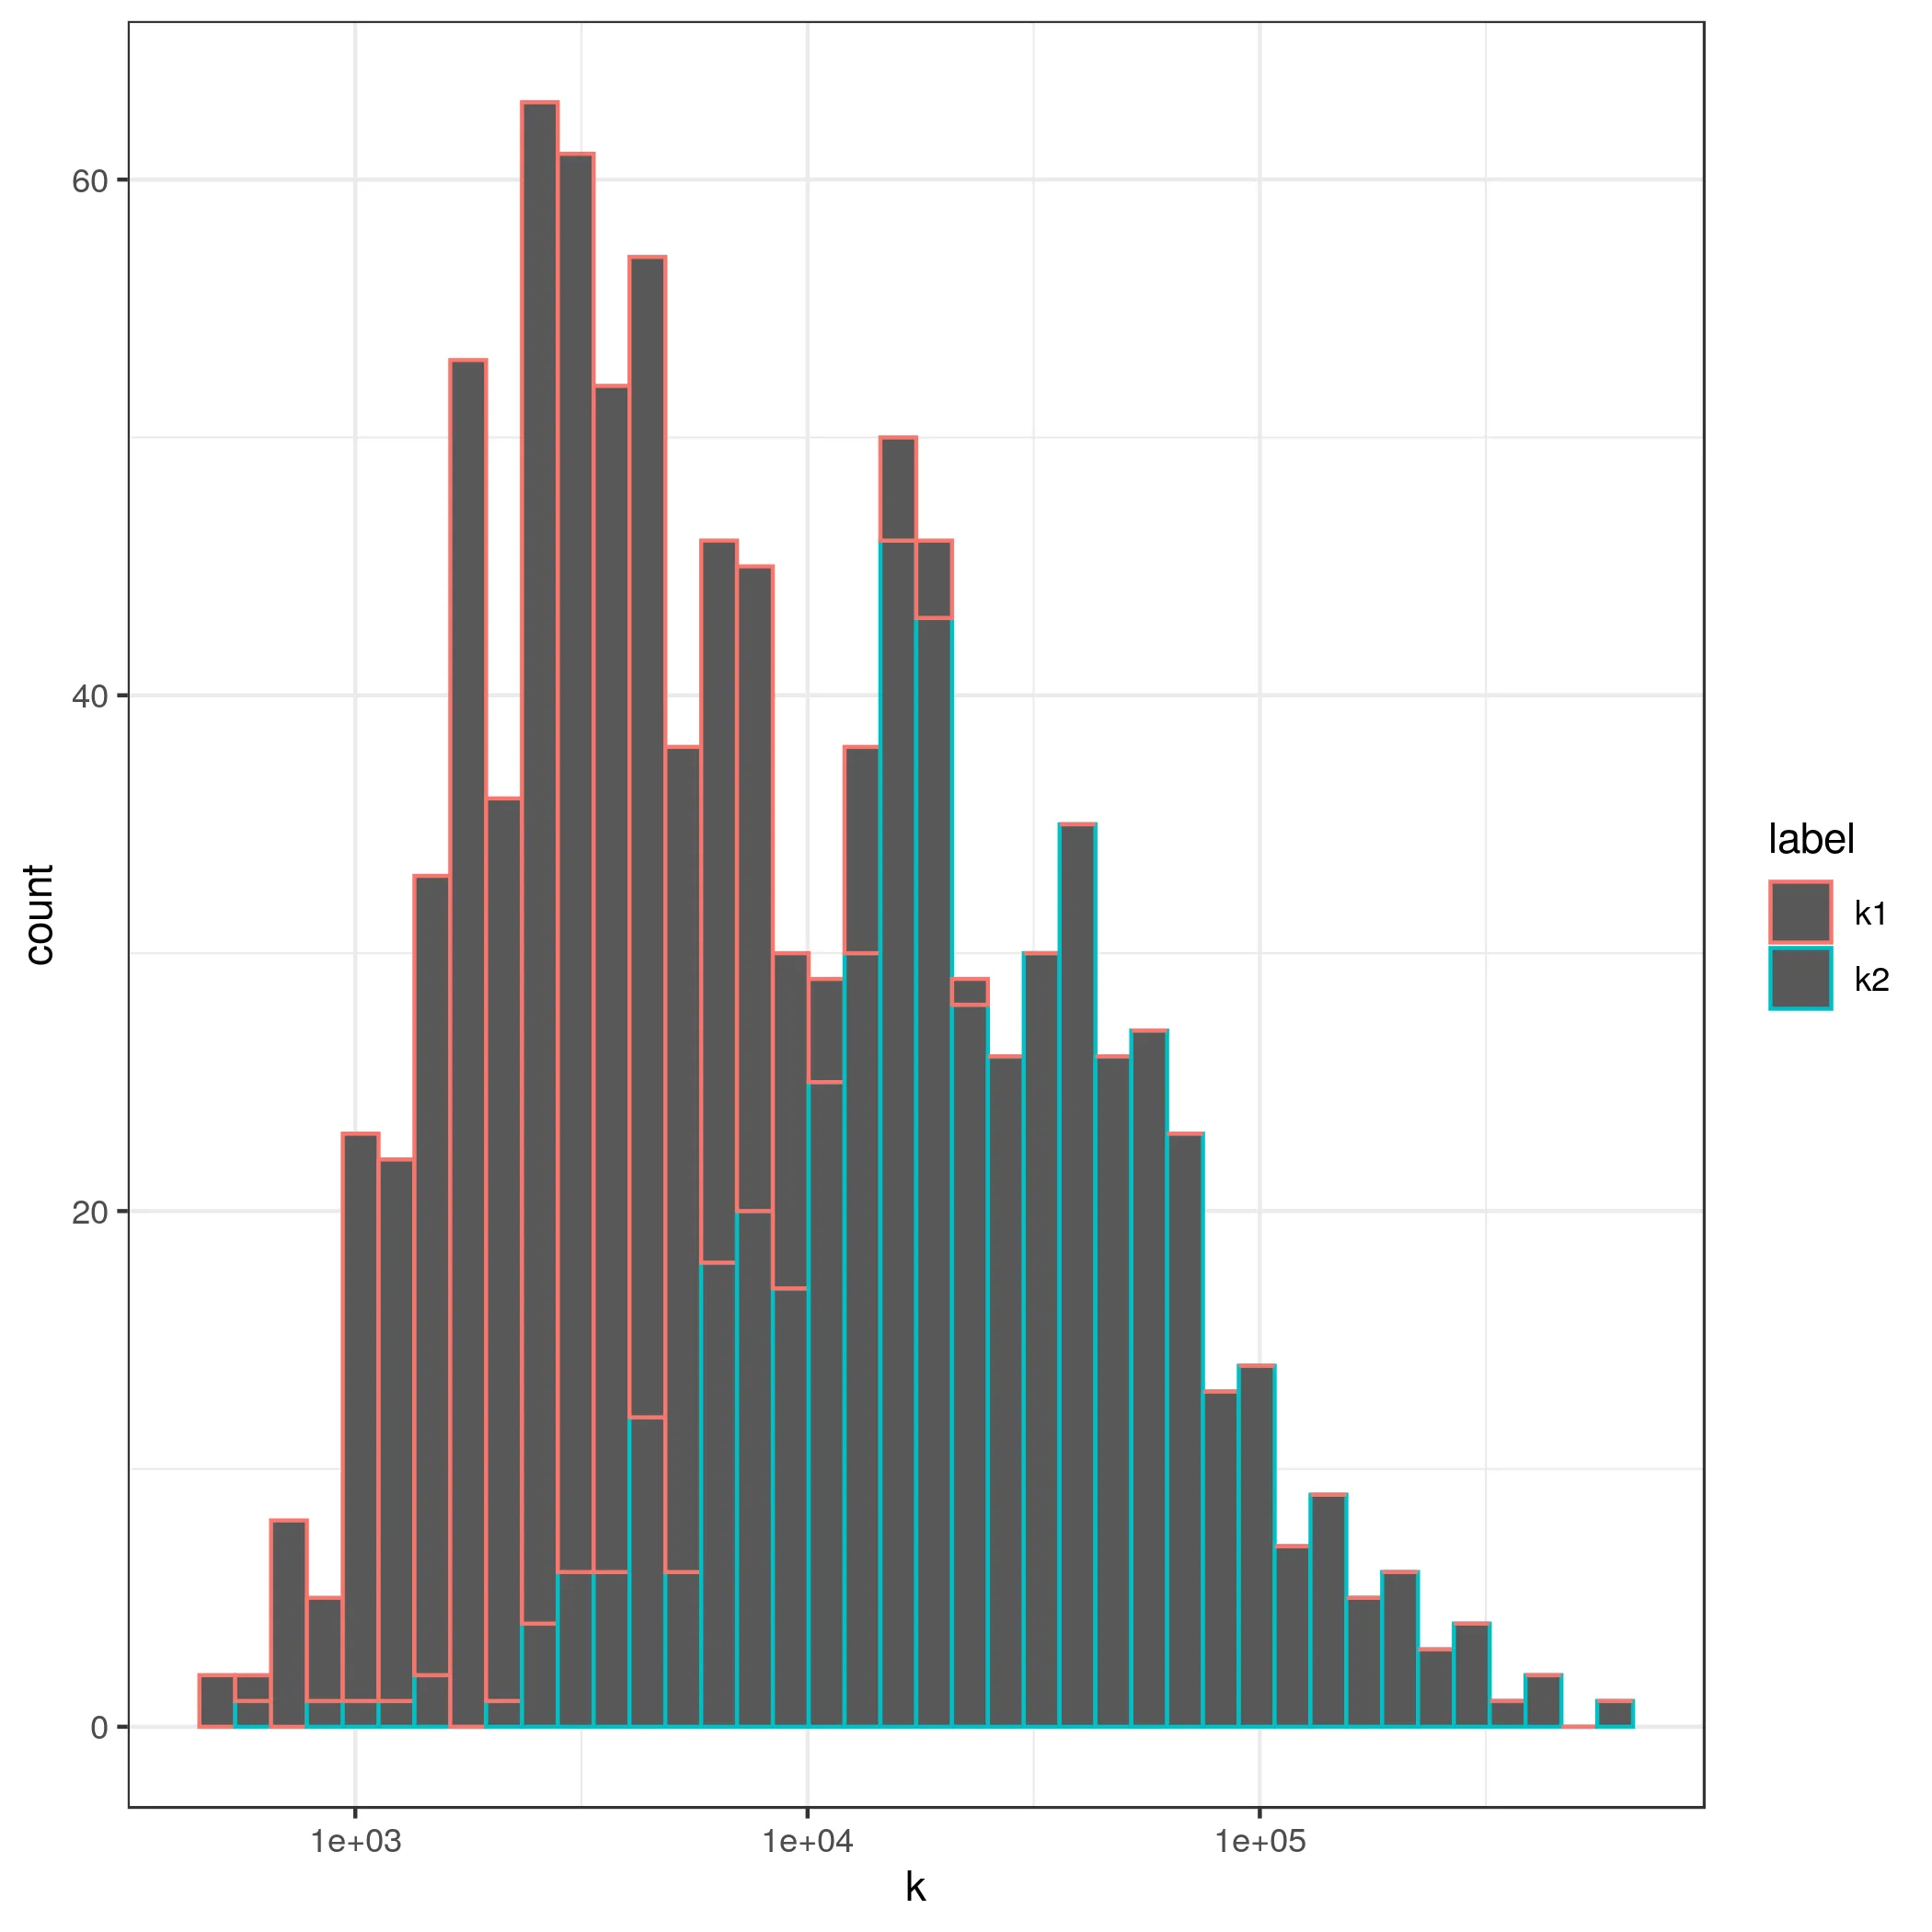 Histogram without showing differences